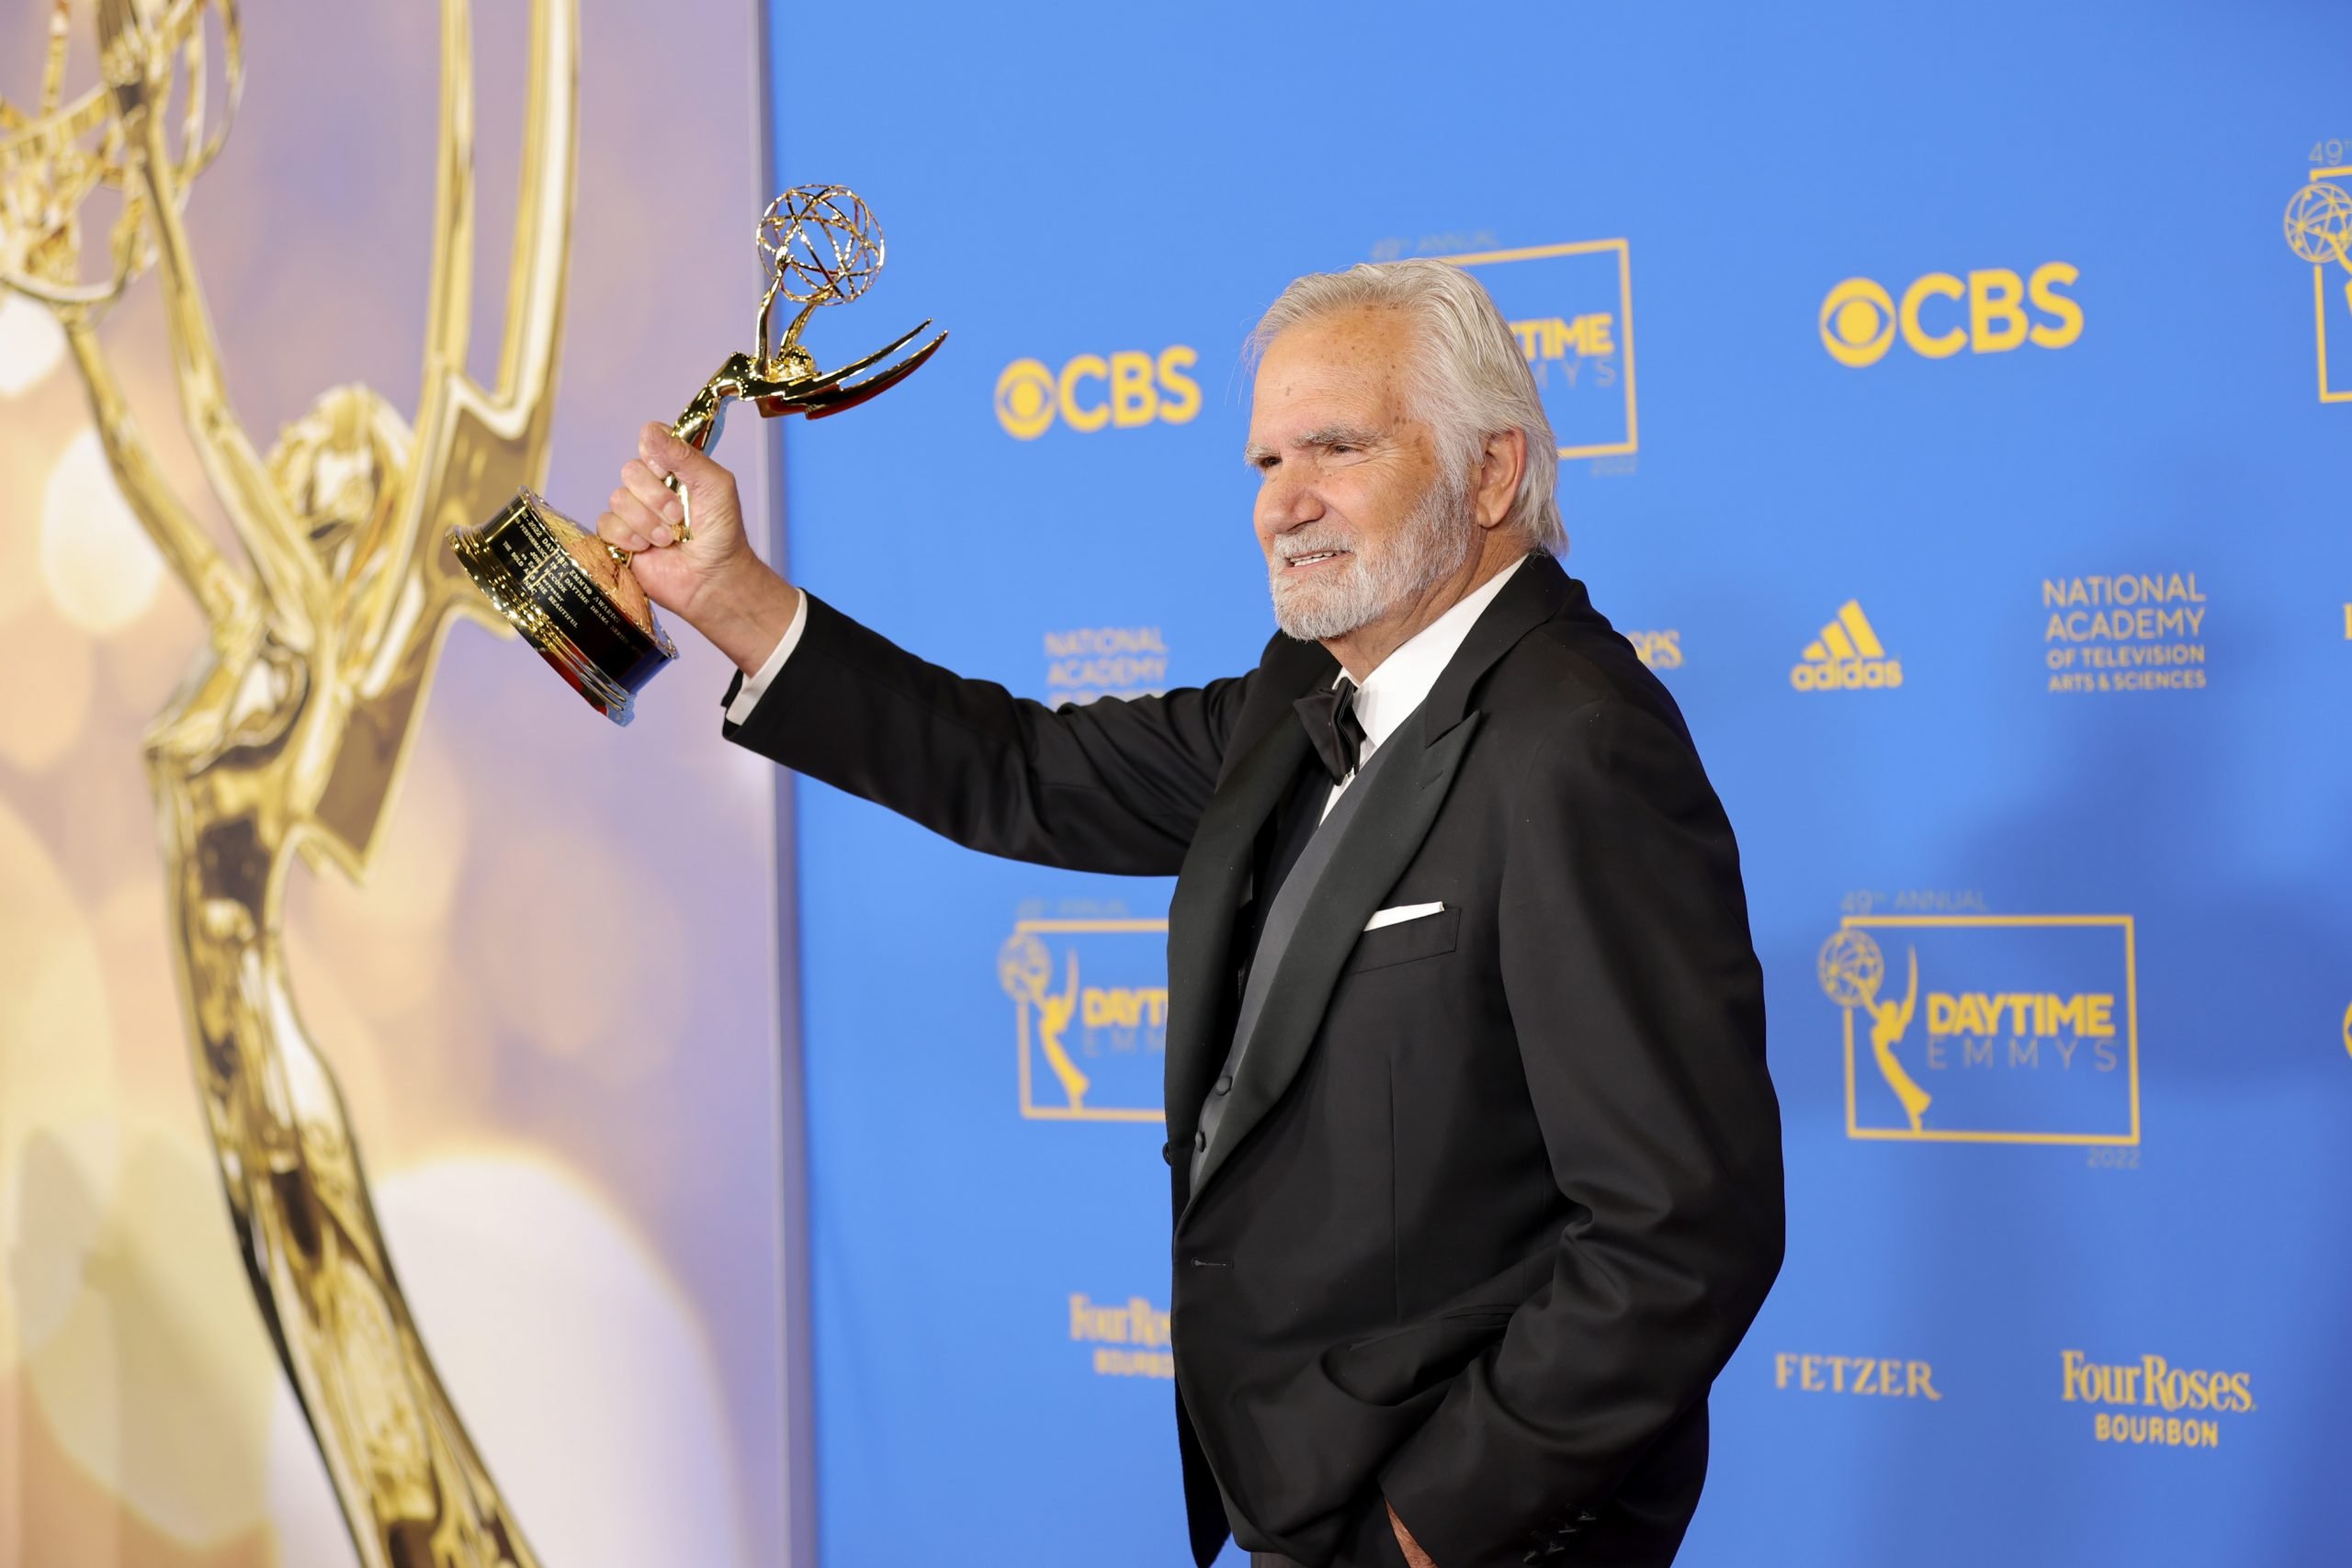 'The Bold and the Beautiful' star John McCook poses with his 2022 Daytime Emmy for Lead Actor.